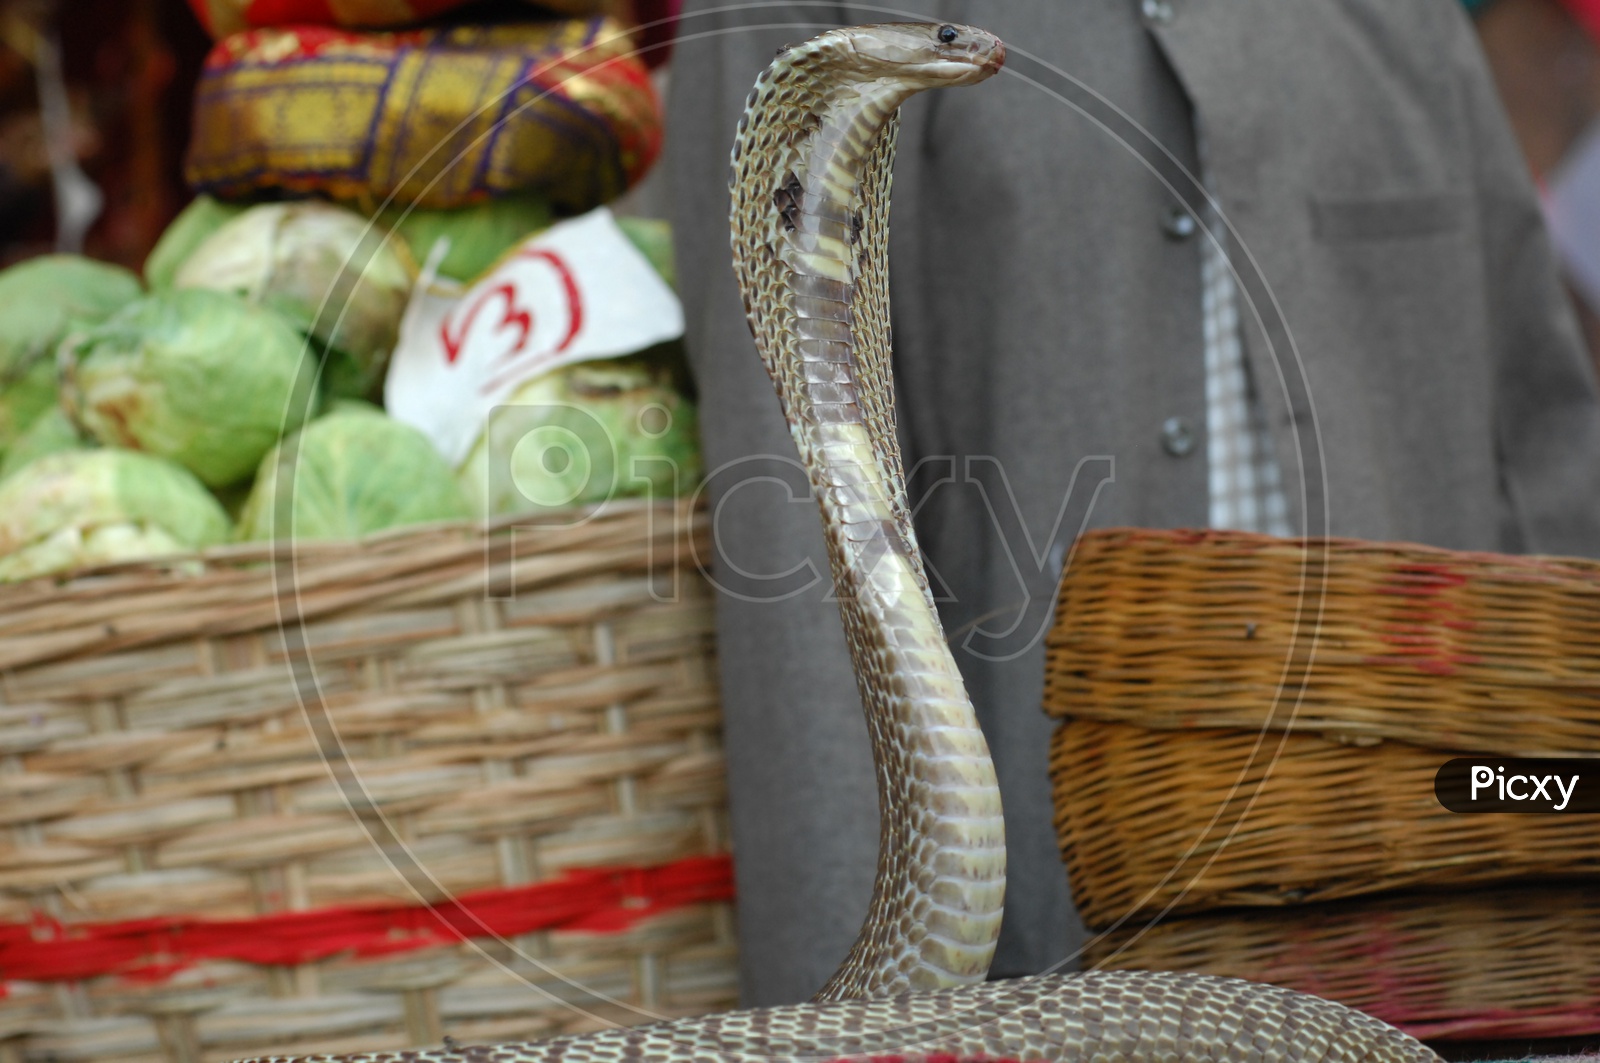 An Indian Cobra with its hood opened alongside the vegetables